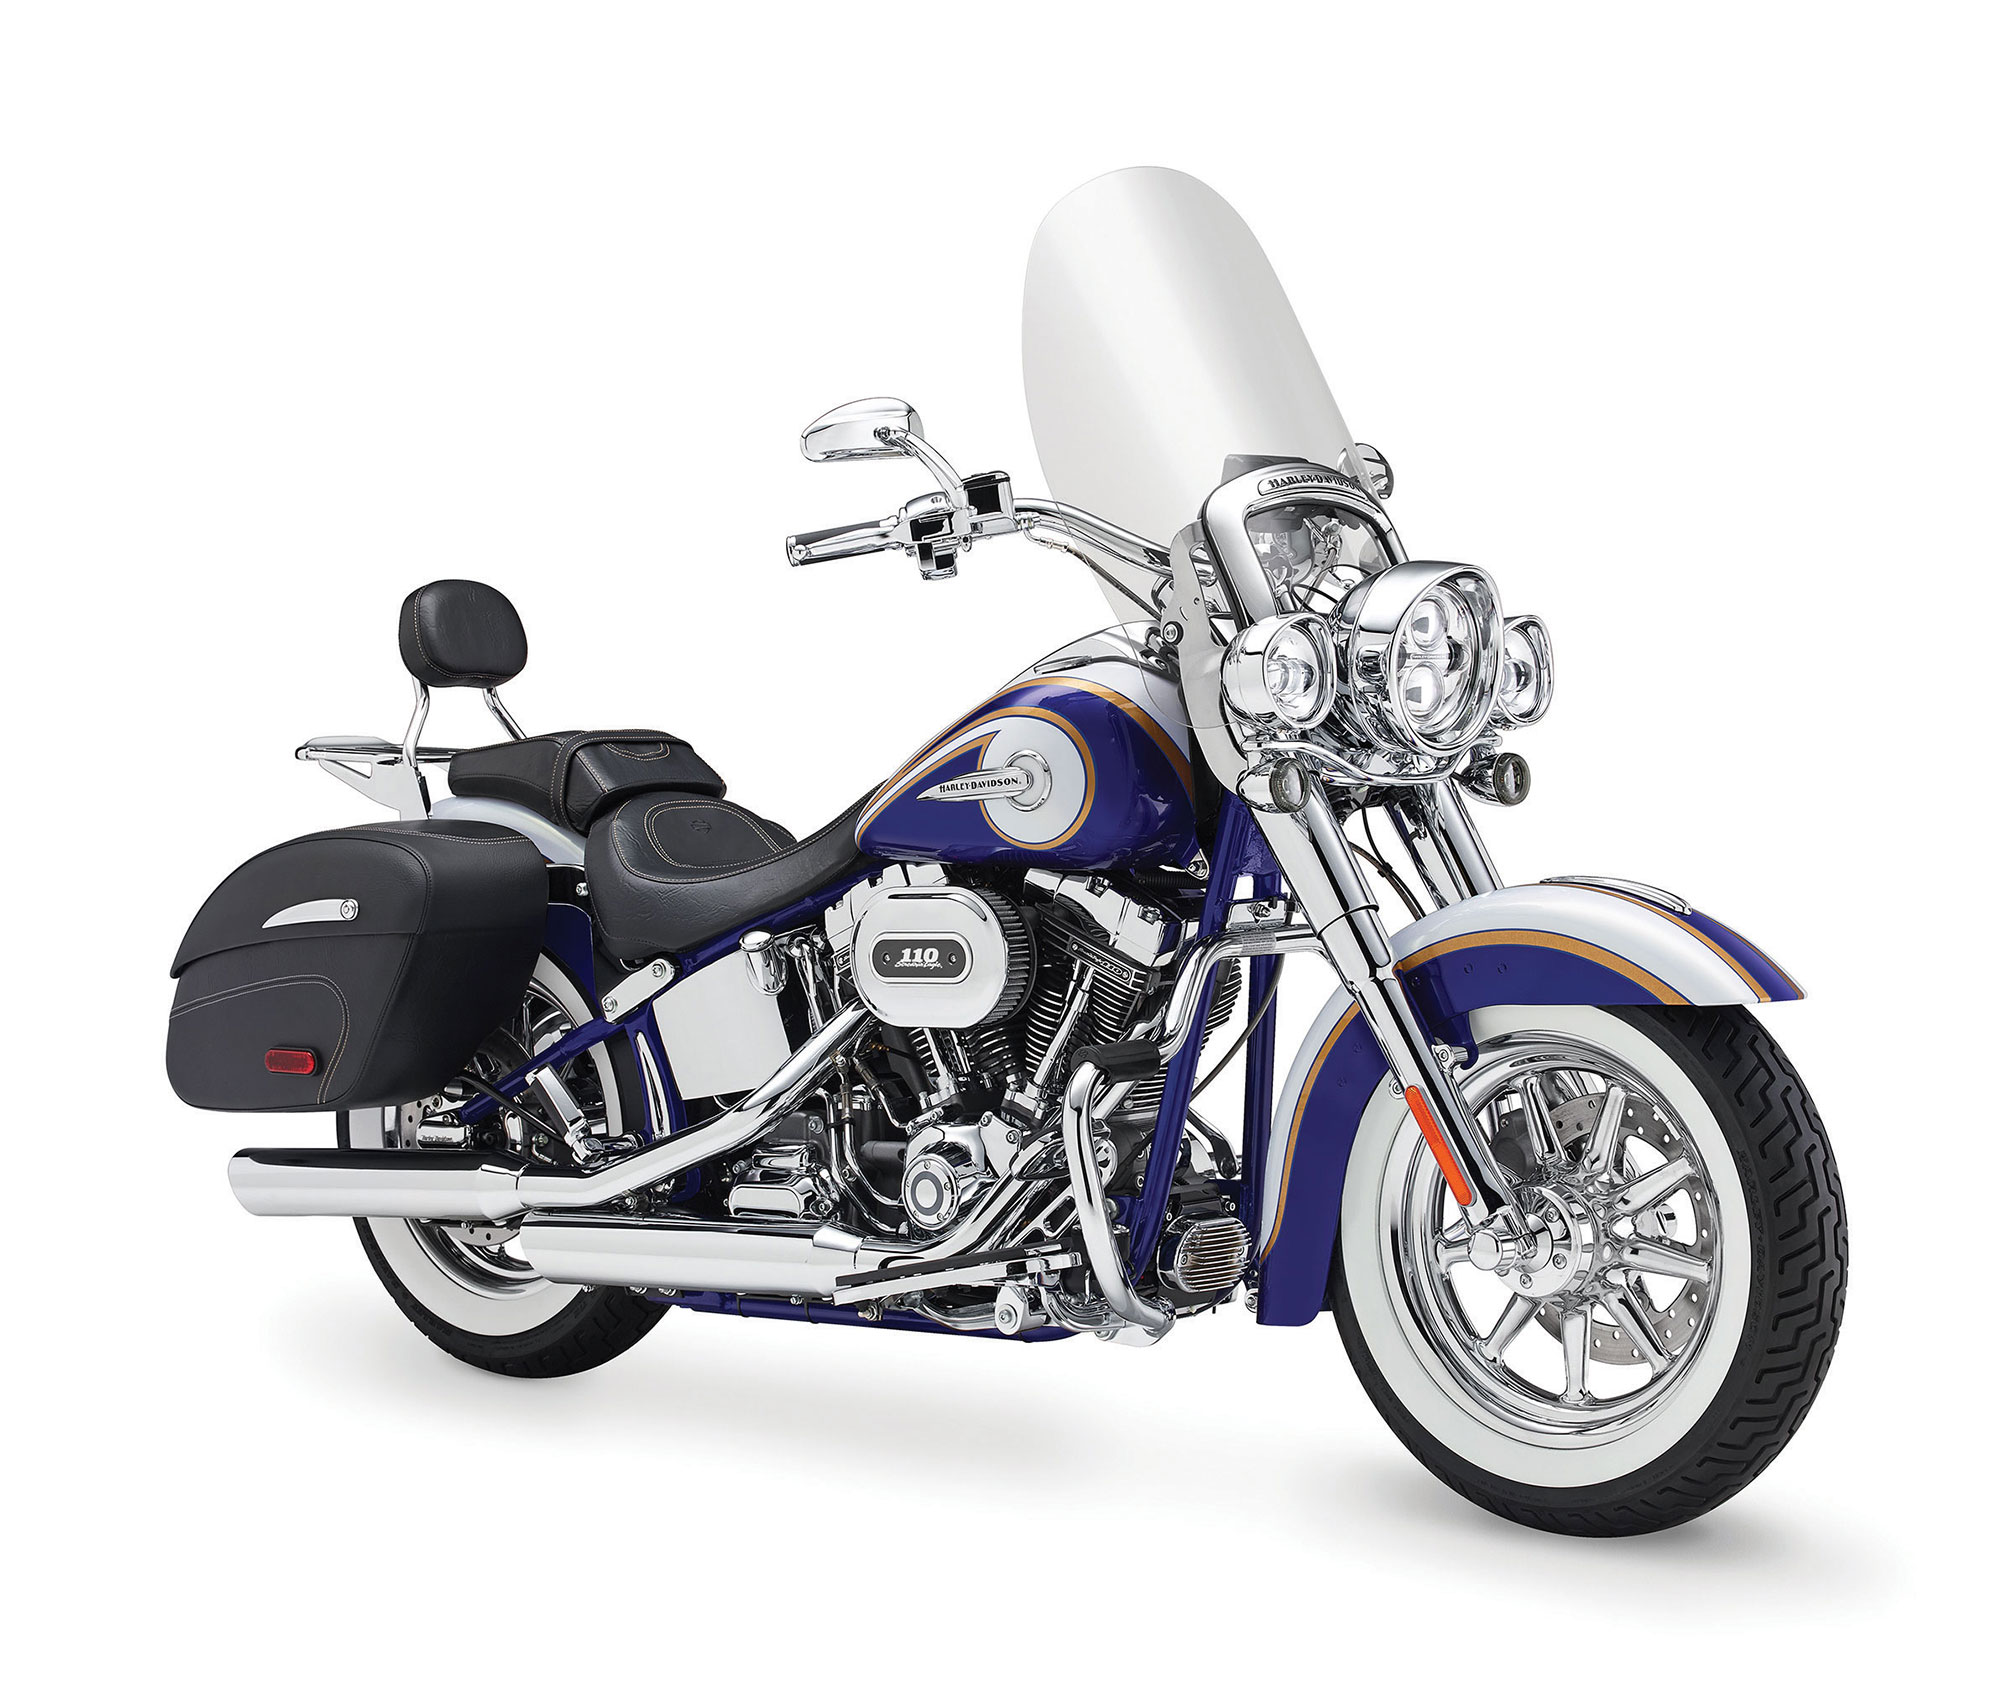 HQ Harley-davidson Softail Deluxe Wallpapers | File 401.26Kb